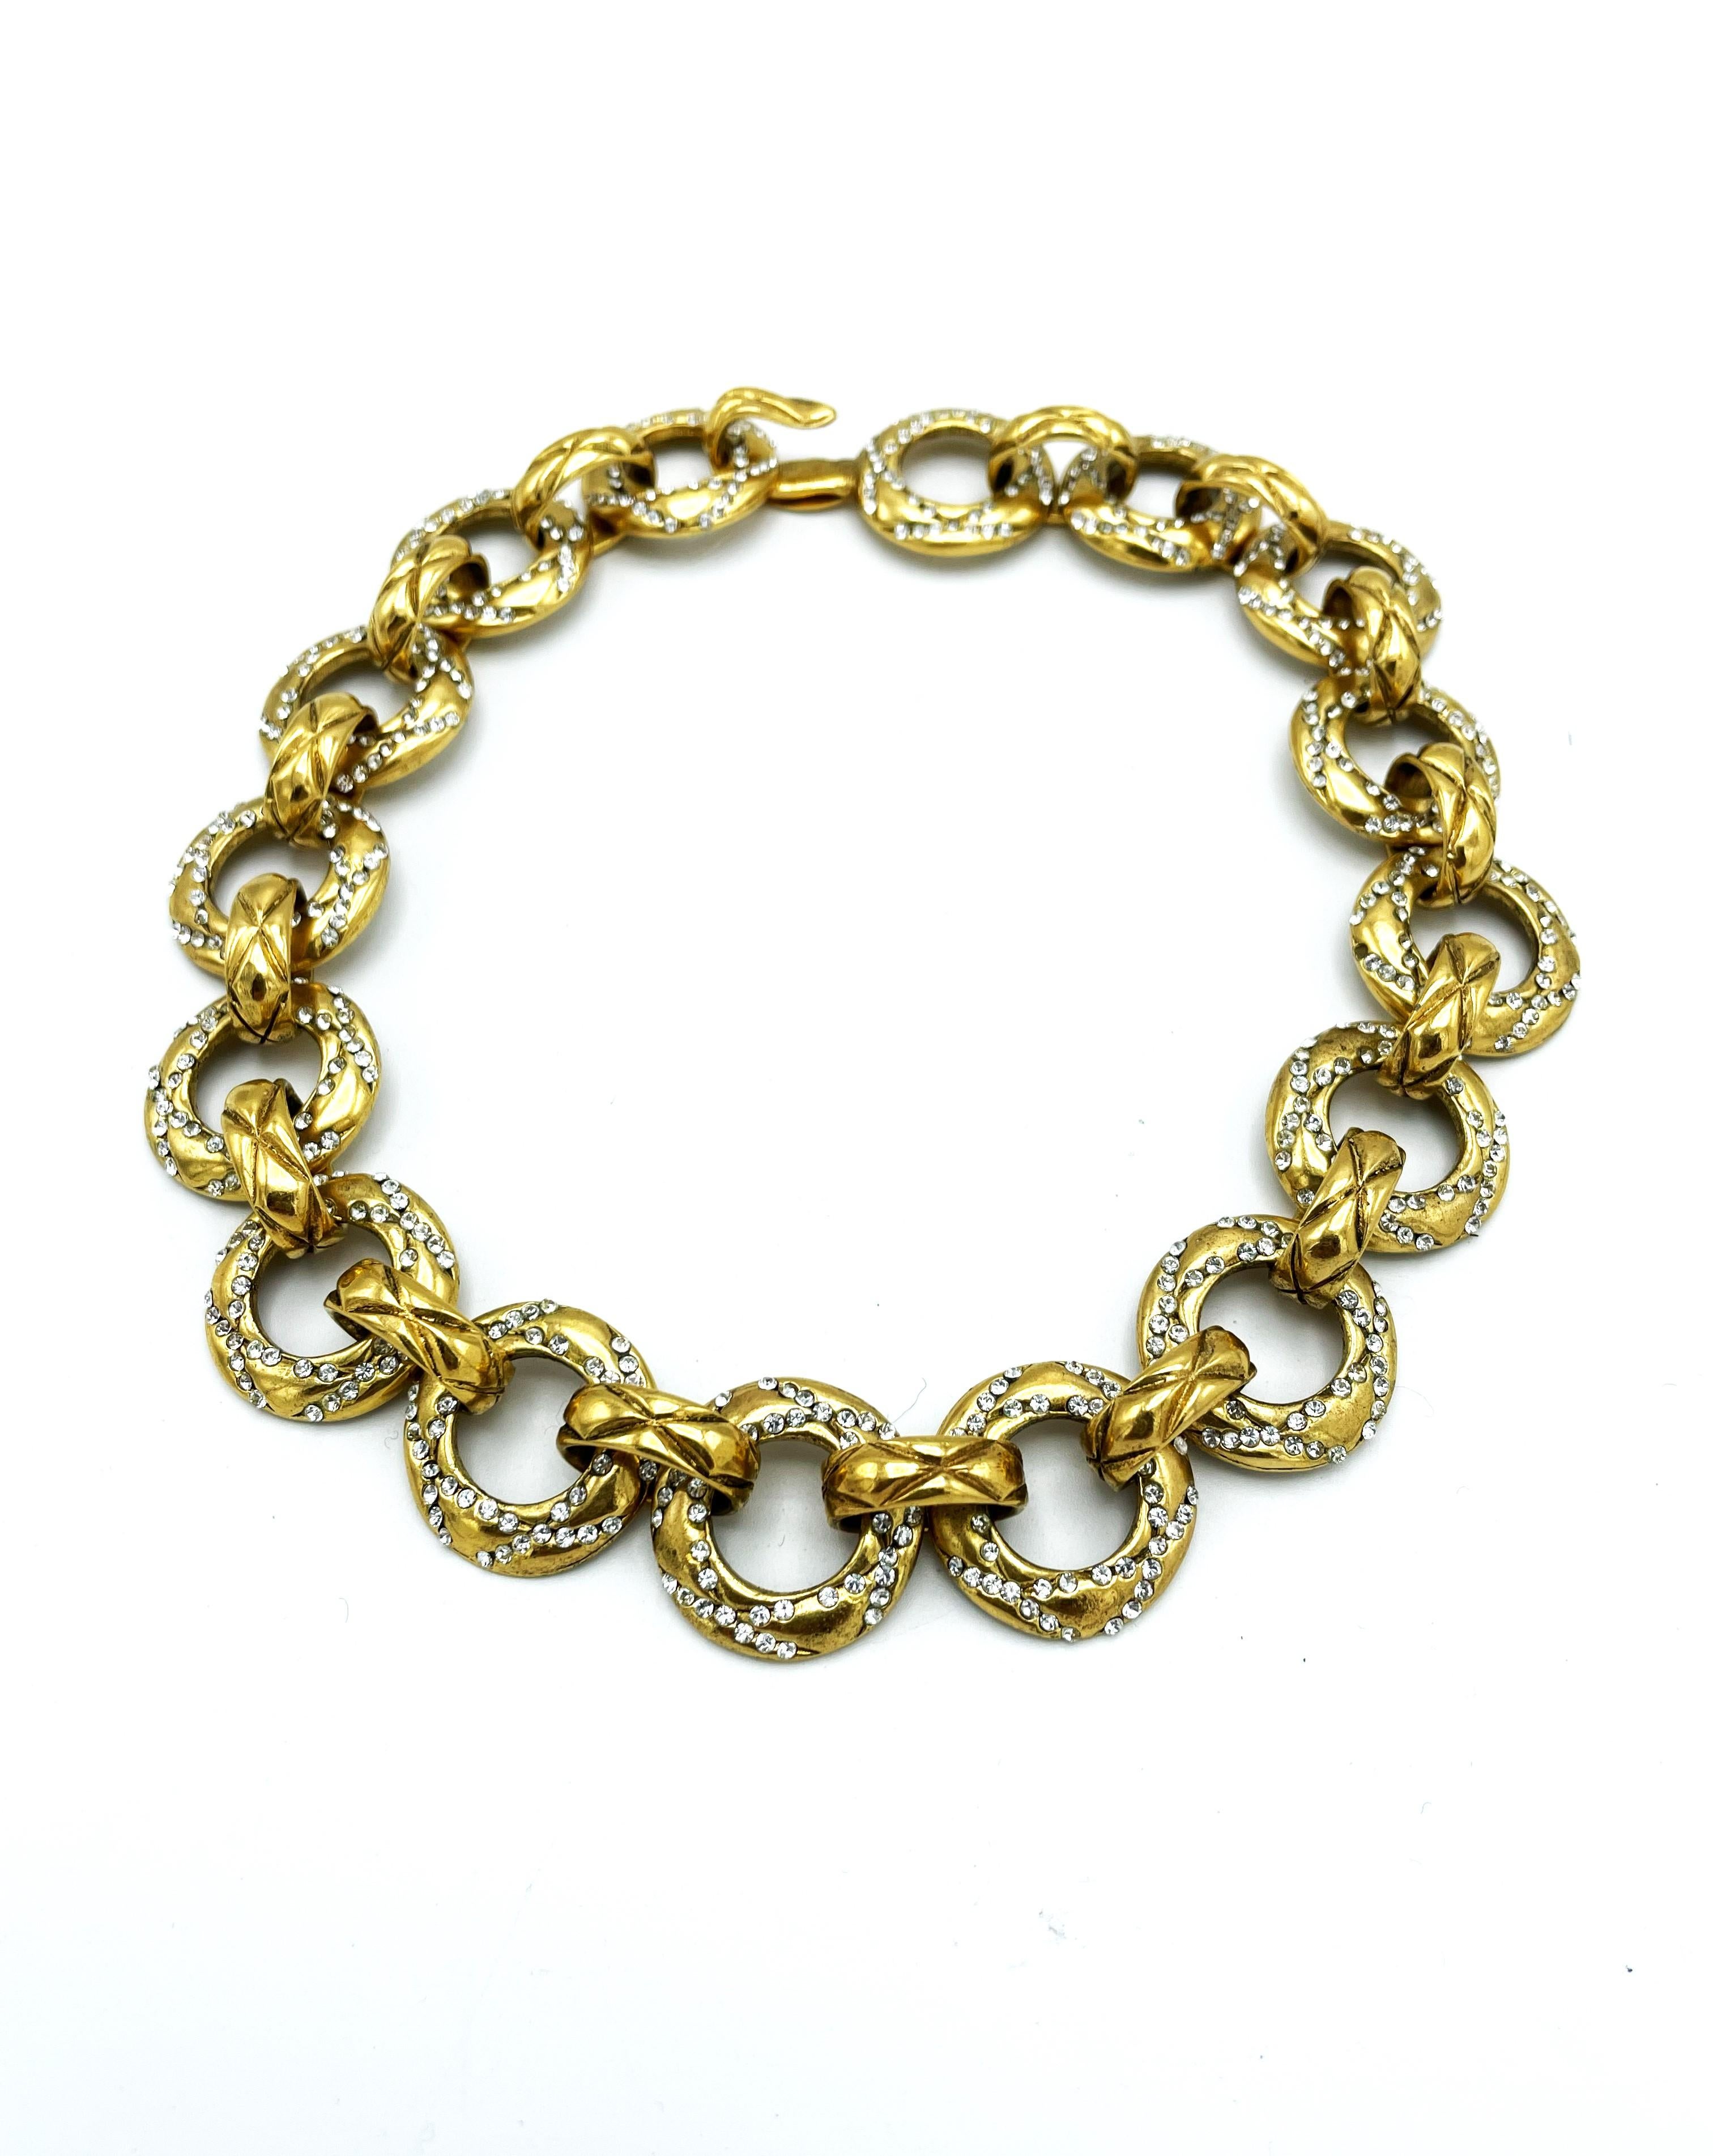 Chanel by Karl Laagerfeld & Victoire de Castellane - Fall/Winter 1990 - 1991 - Reday to Wear Collection. Quilted gold metal chain - chocker set with shiny Swarovski rhinestones.  Signed on plaque 

Measurement 
Length of the necklace 44 cm ,